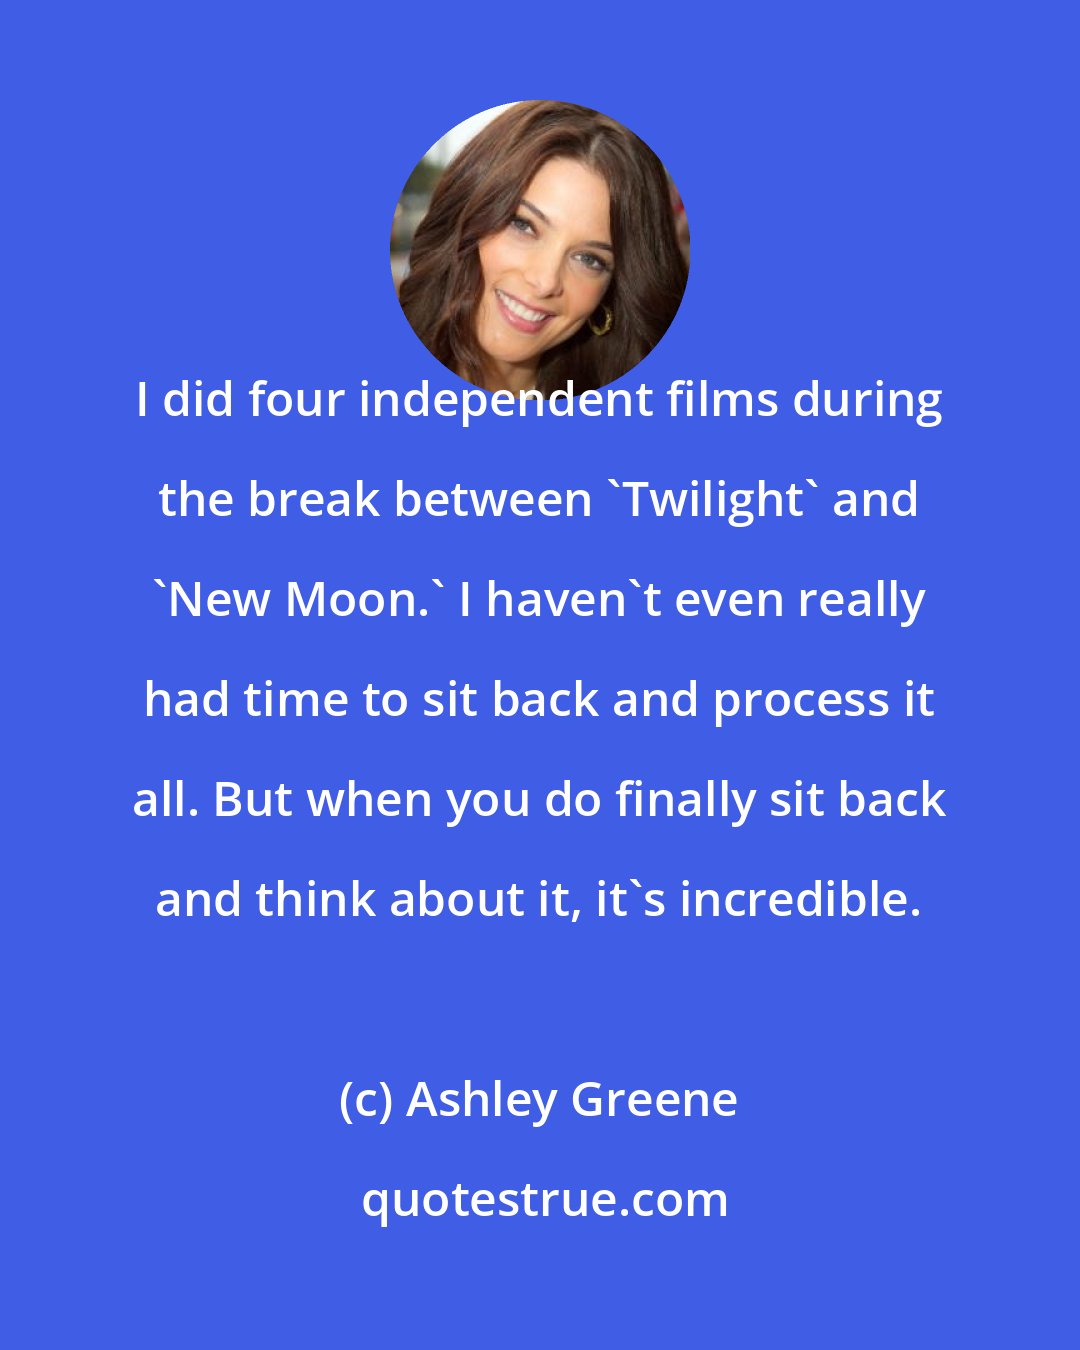 Ashley Greene: I did four independent films during the break between 'Twilight' and 'New Moon.' I haven't even really had time to sit back and process it all. But when you do finally sit back and think about it, it's incredible.